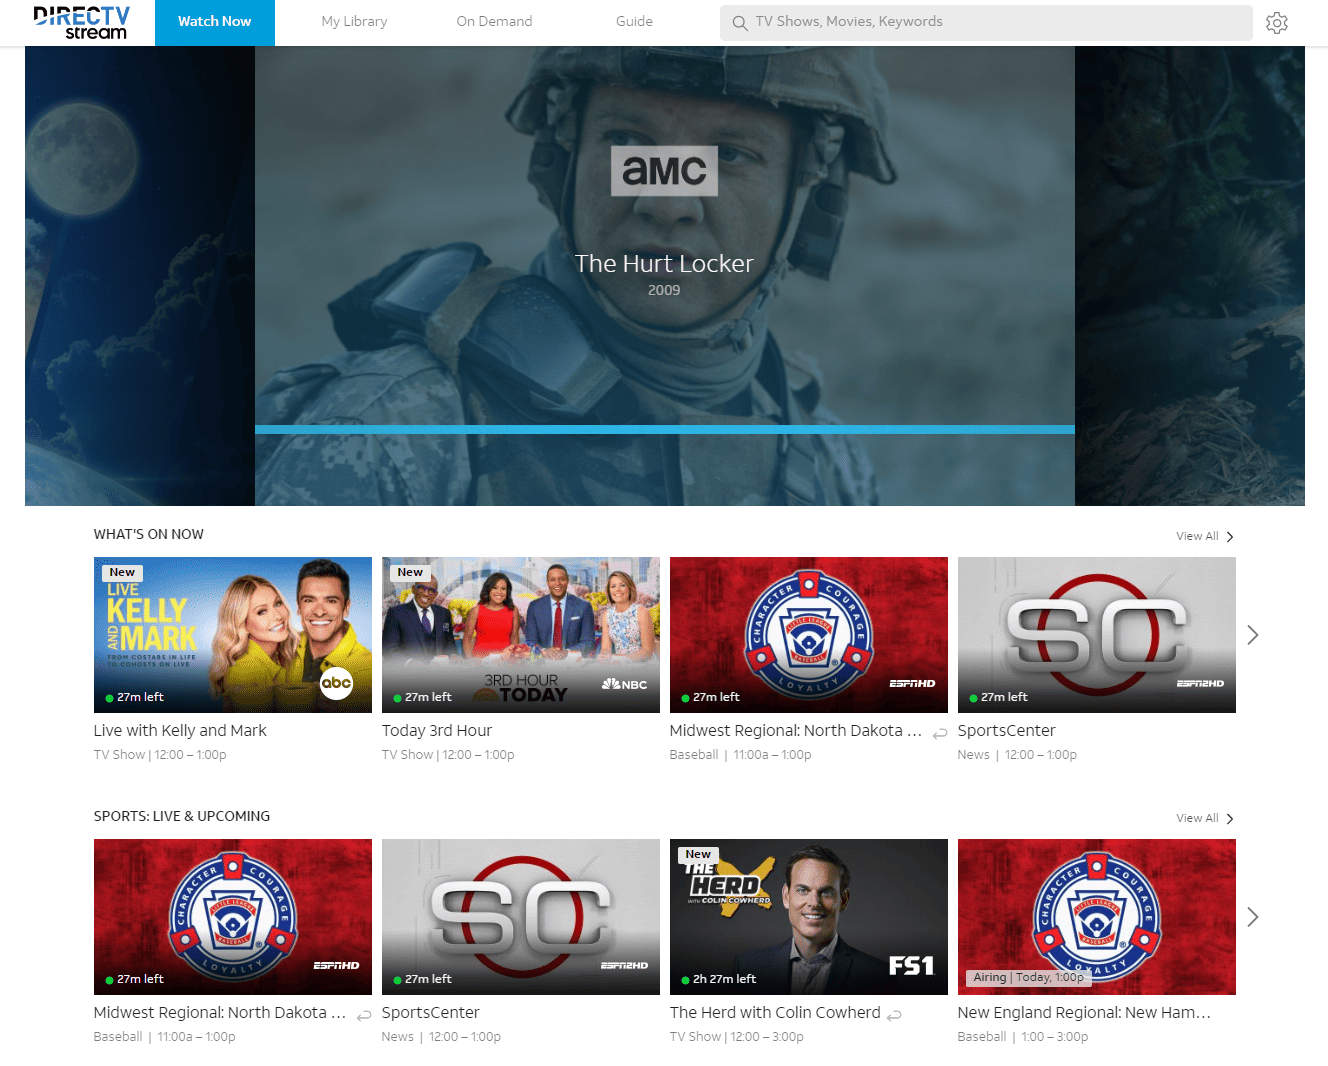 I'm testing DirecTV Stream to cut the cord — here's the pros and